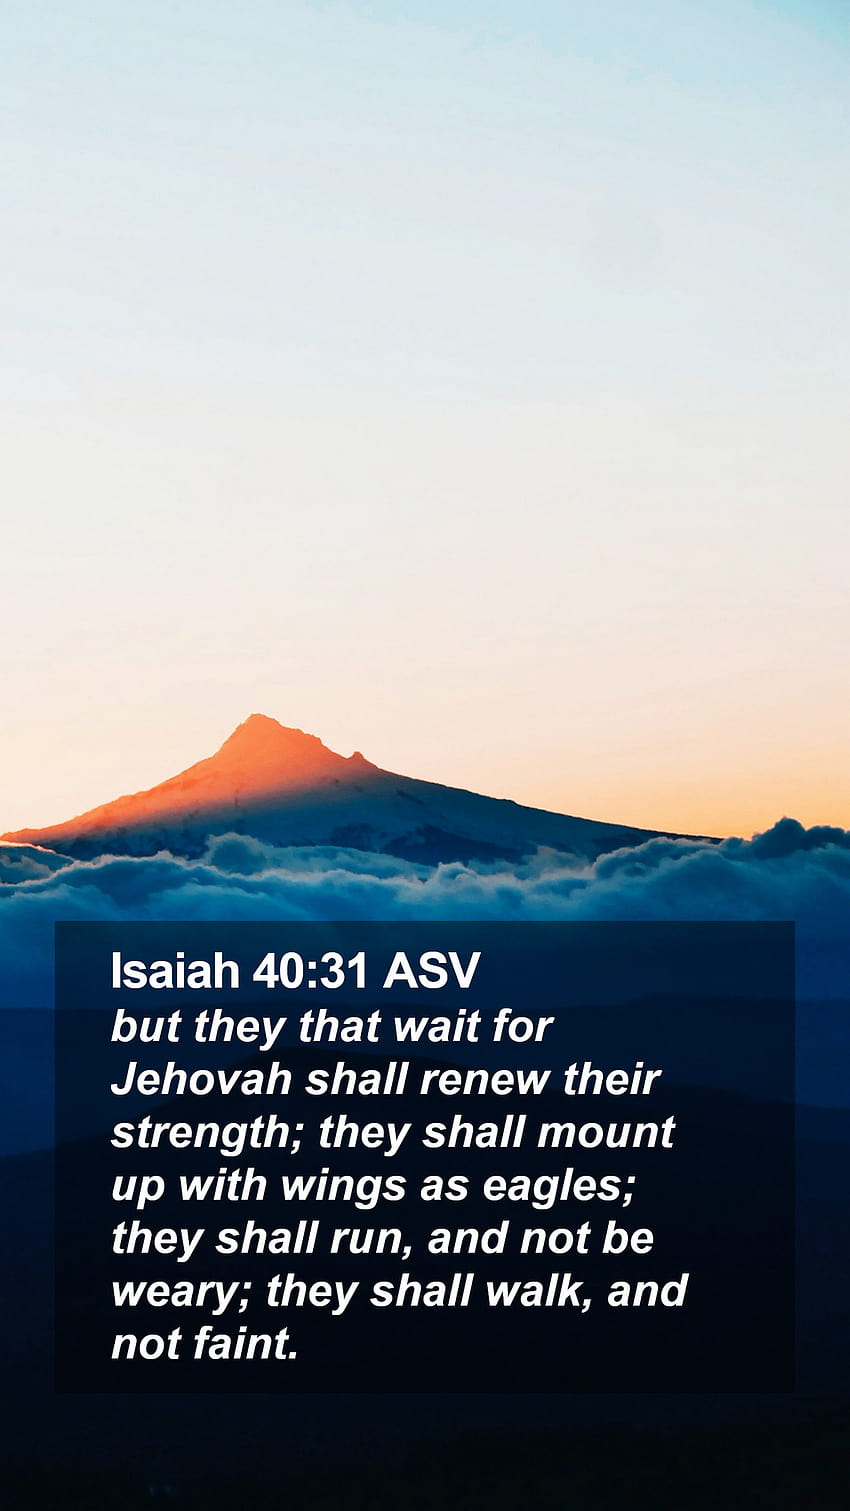 Cup Of Water on Twitter Bible verse of the day  Isaiah4031 ReadBible  Verseofthe Day with Wallpapers for Download httpstcoRyQSrJd7ka  httpstcoTH6KbkKmp7  X